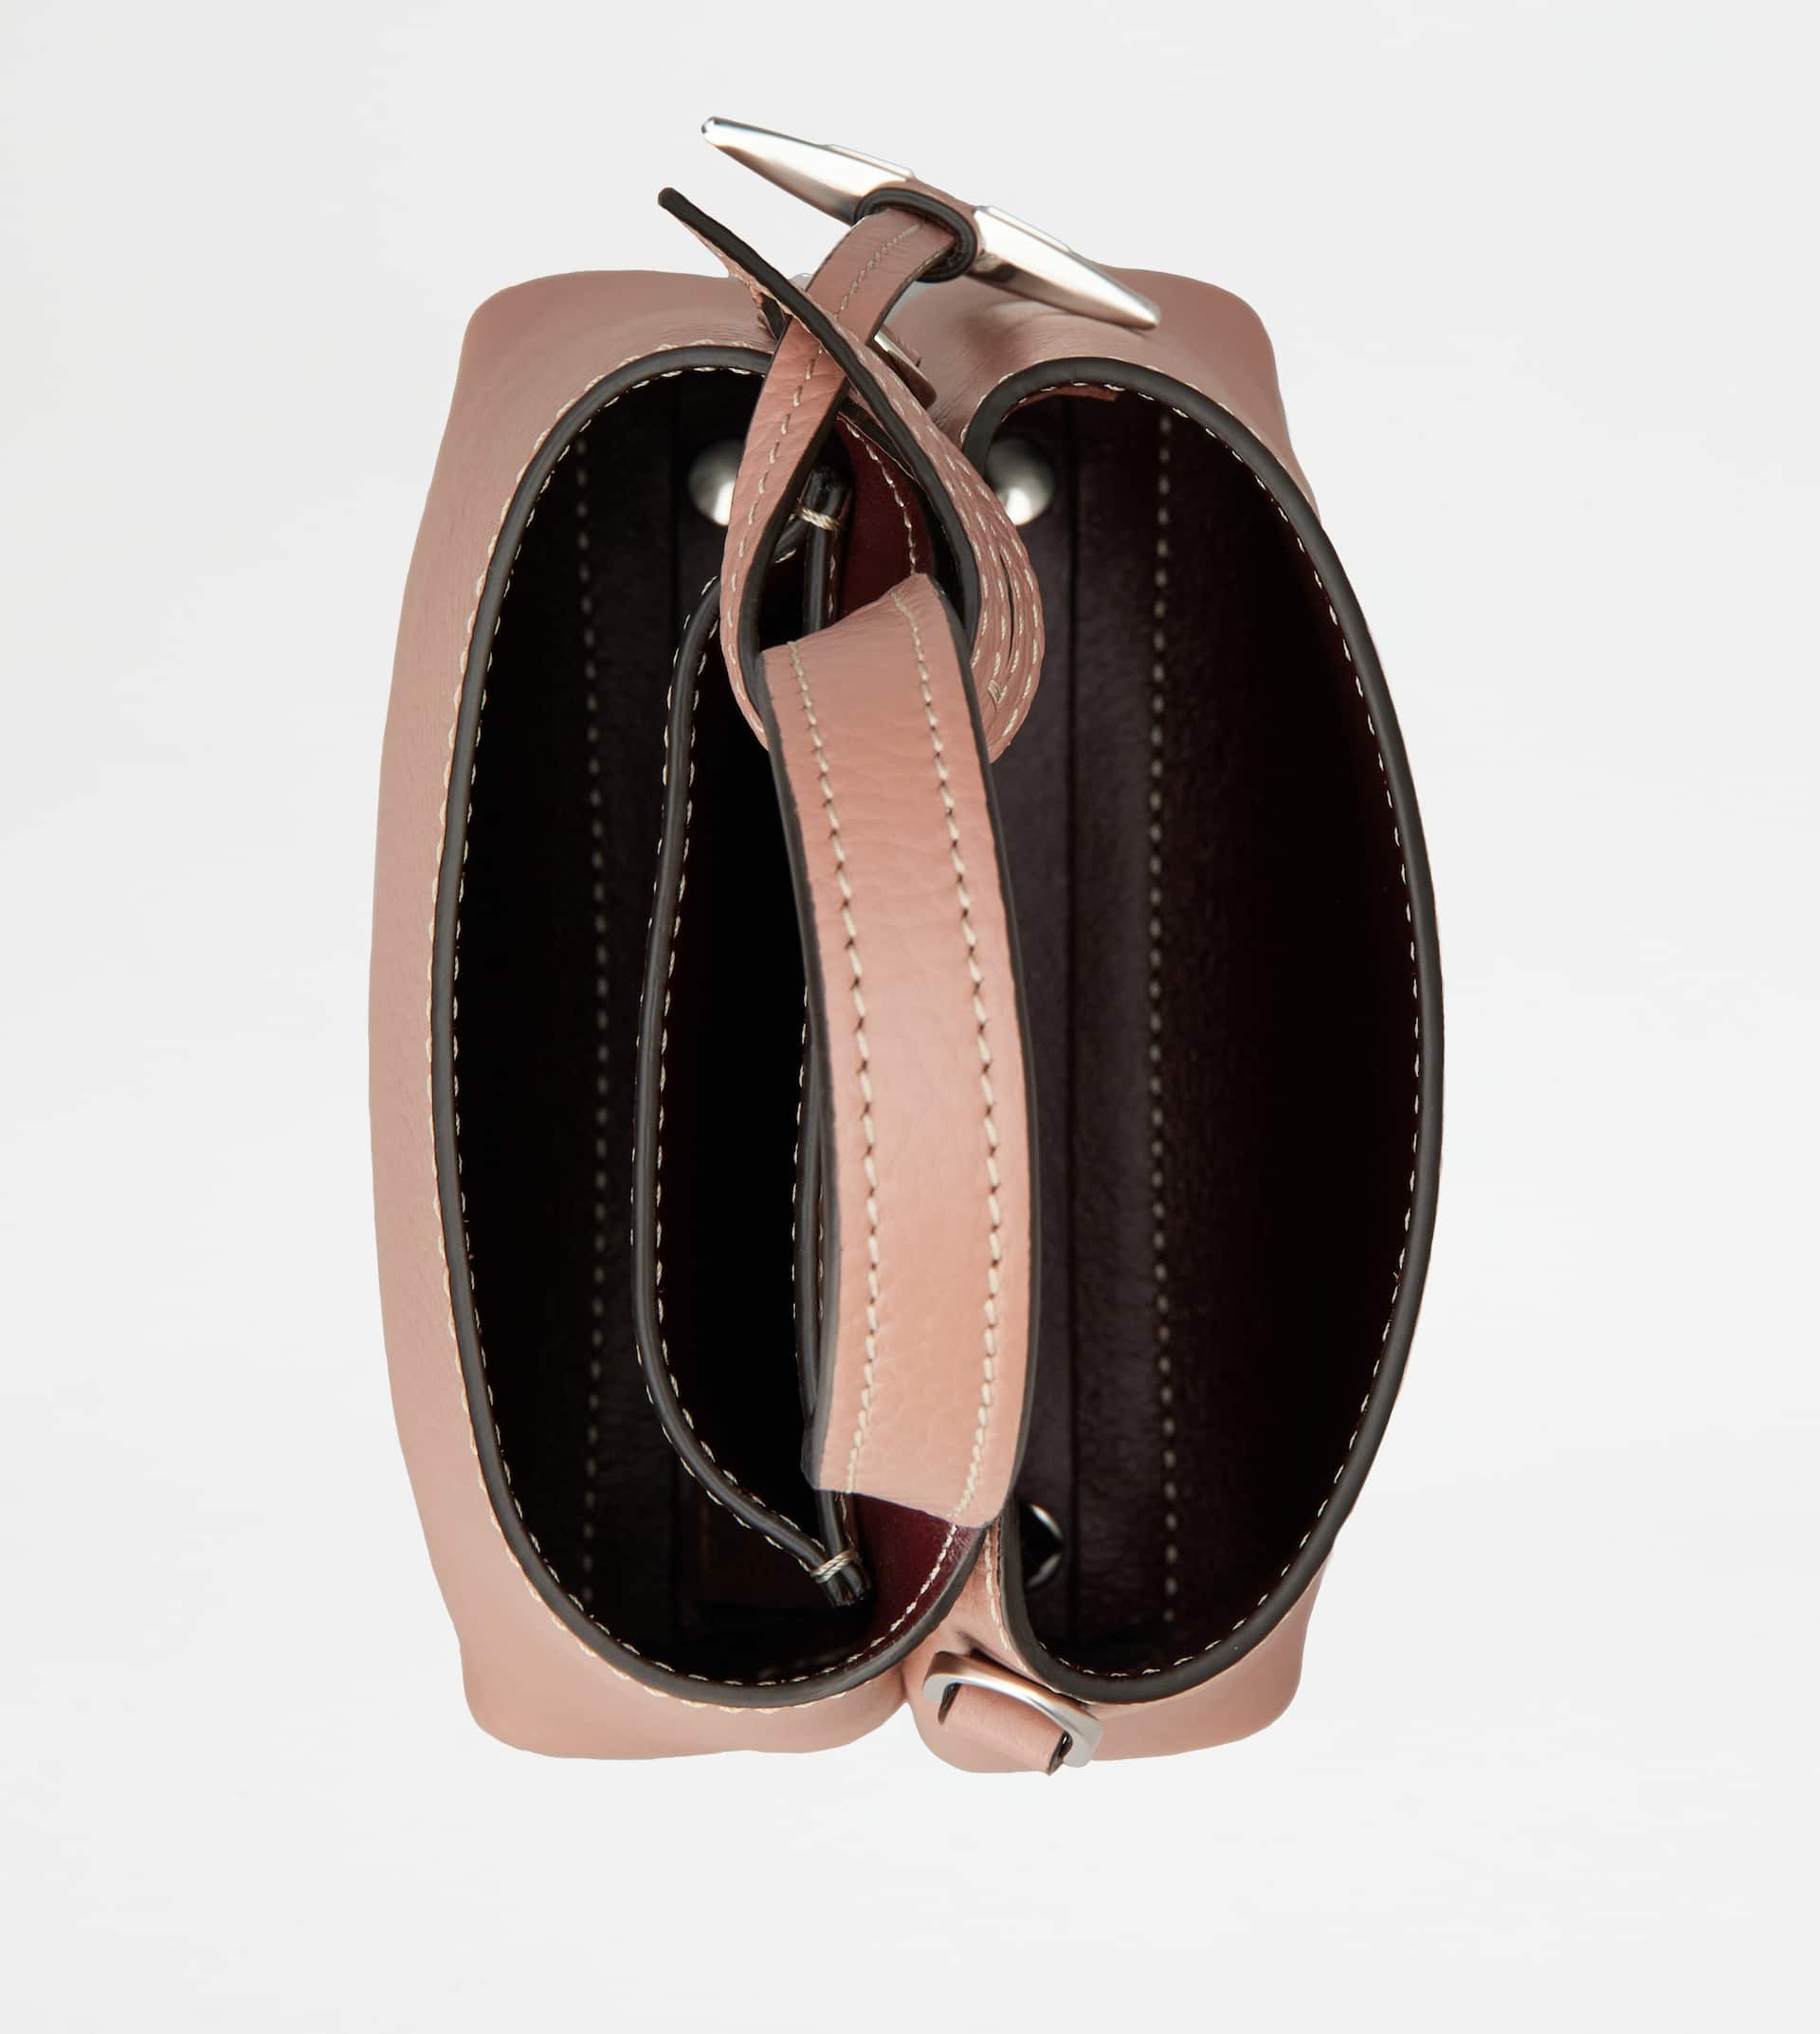 TOD'S MICRO BAG IN LEATHER - BURGUNDY, PINK - 4